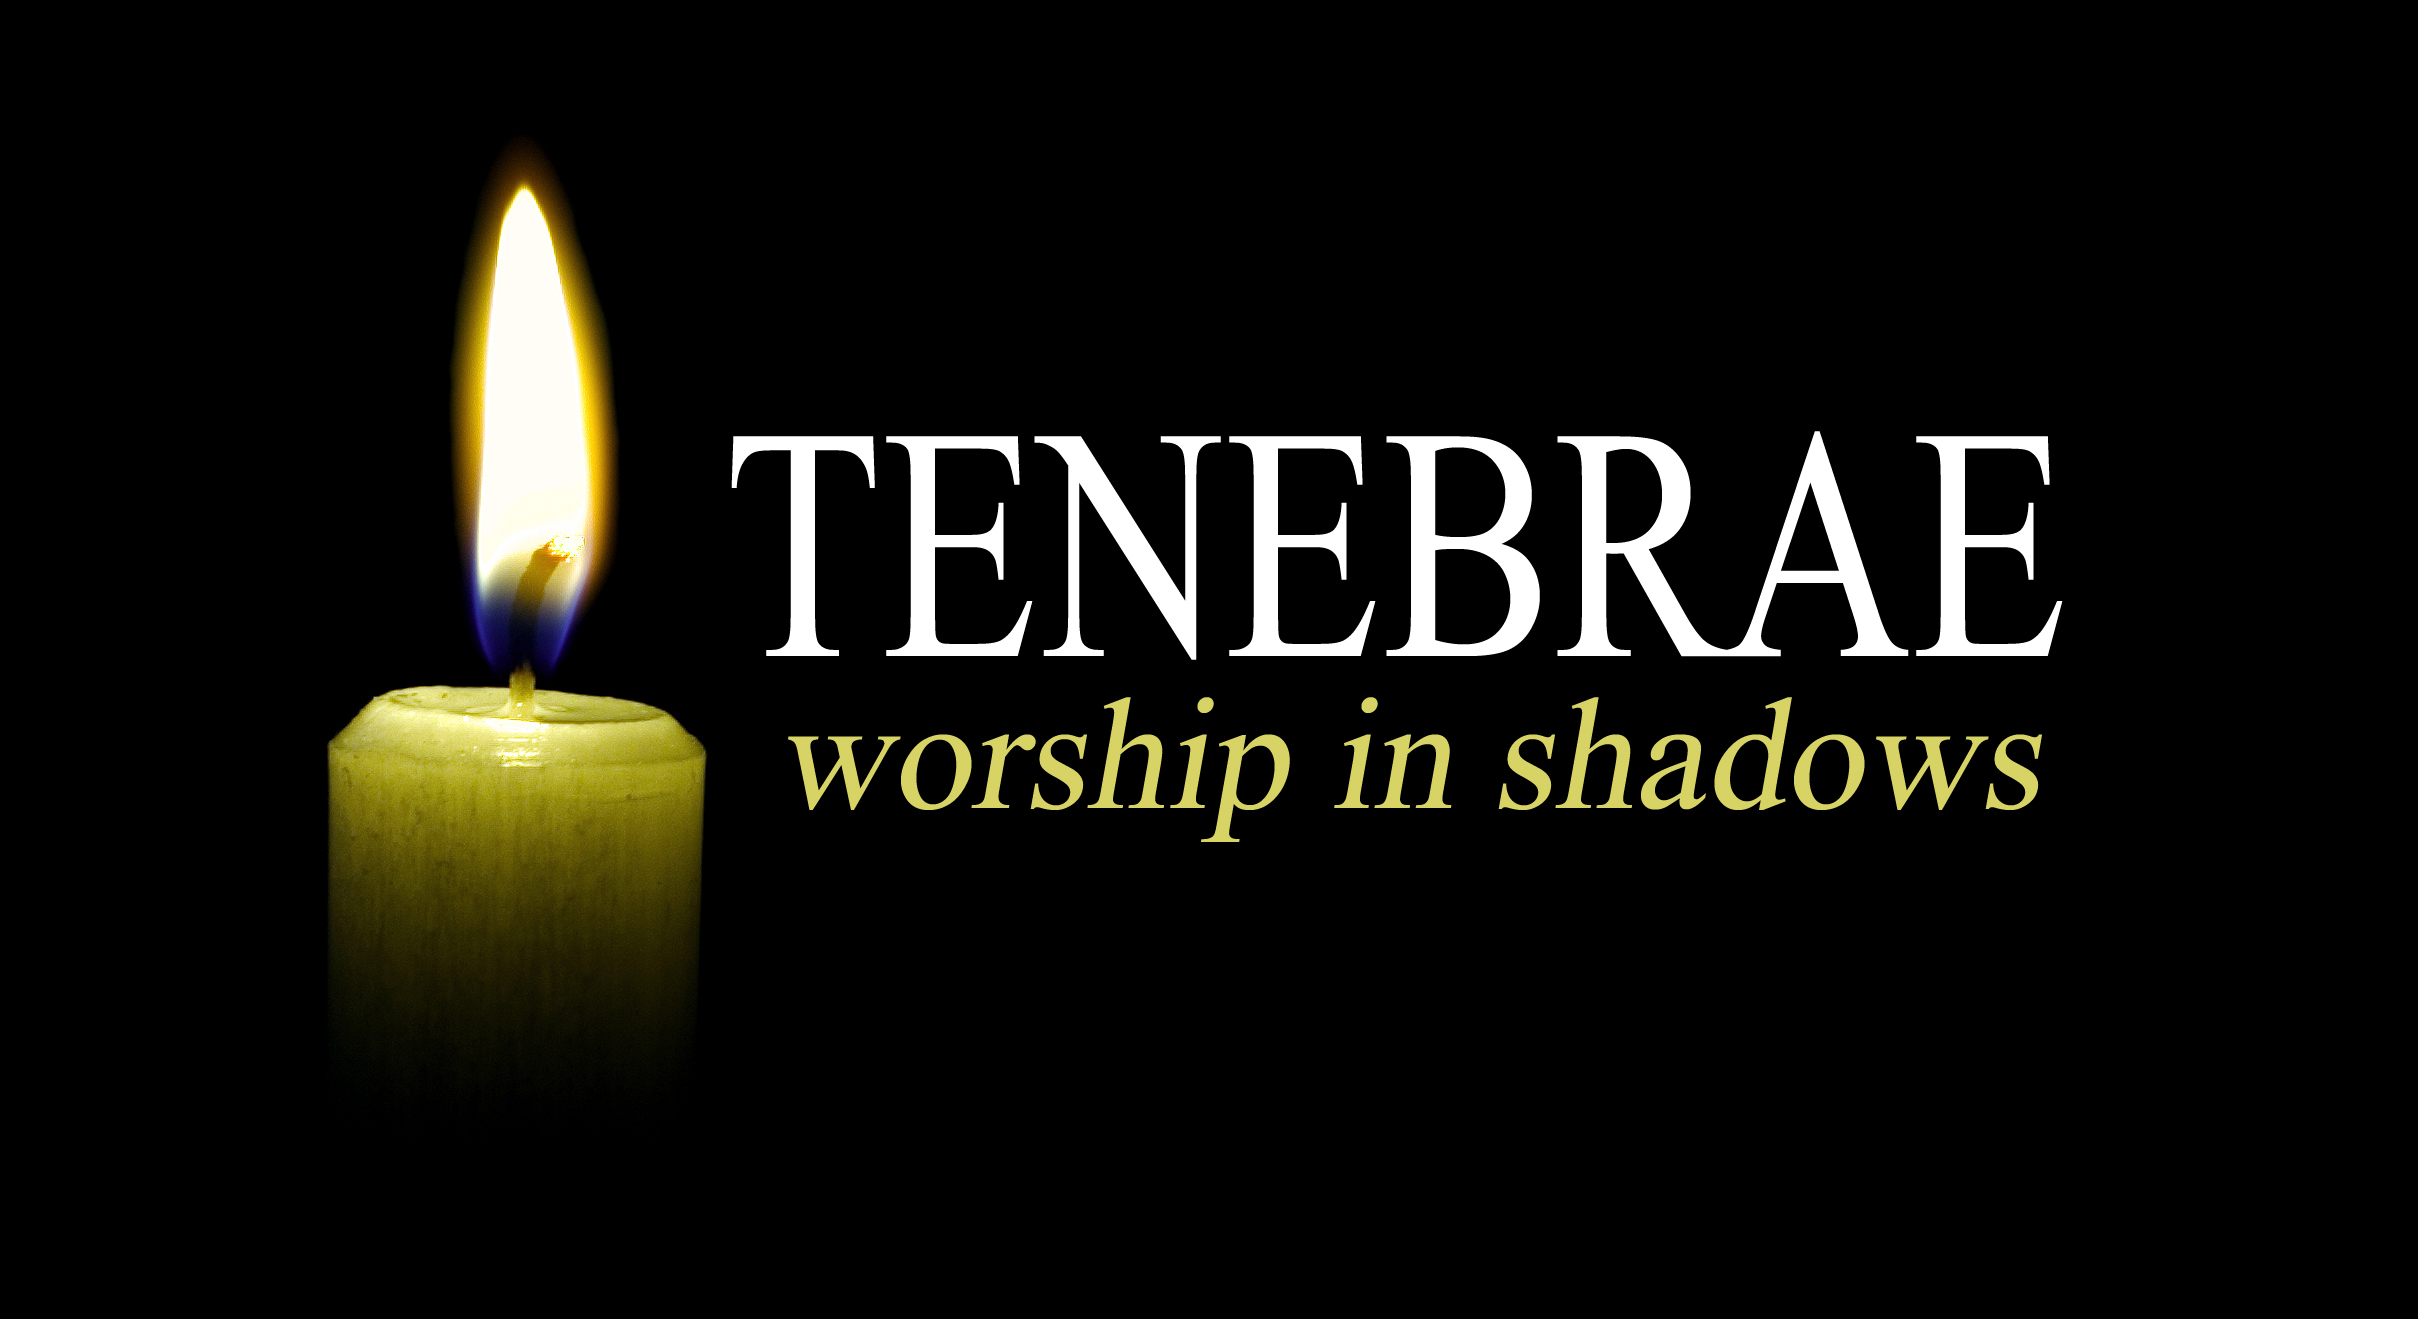 The Service of Tenebrae has a rich tradition in the church dating back to the eight century. Tenebrae is a word derived from Latin meaning "darkness." Through word and music, this service dramatizes the suffering, death, and burial of Jesus Christ. As the service moves from light into darkness, the diminishing light symbolizes the fading devotion of the apostles as well as the gradual dying of our Lord.